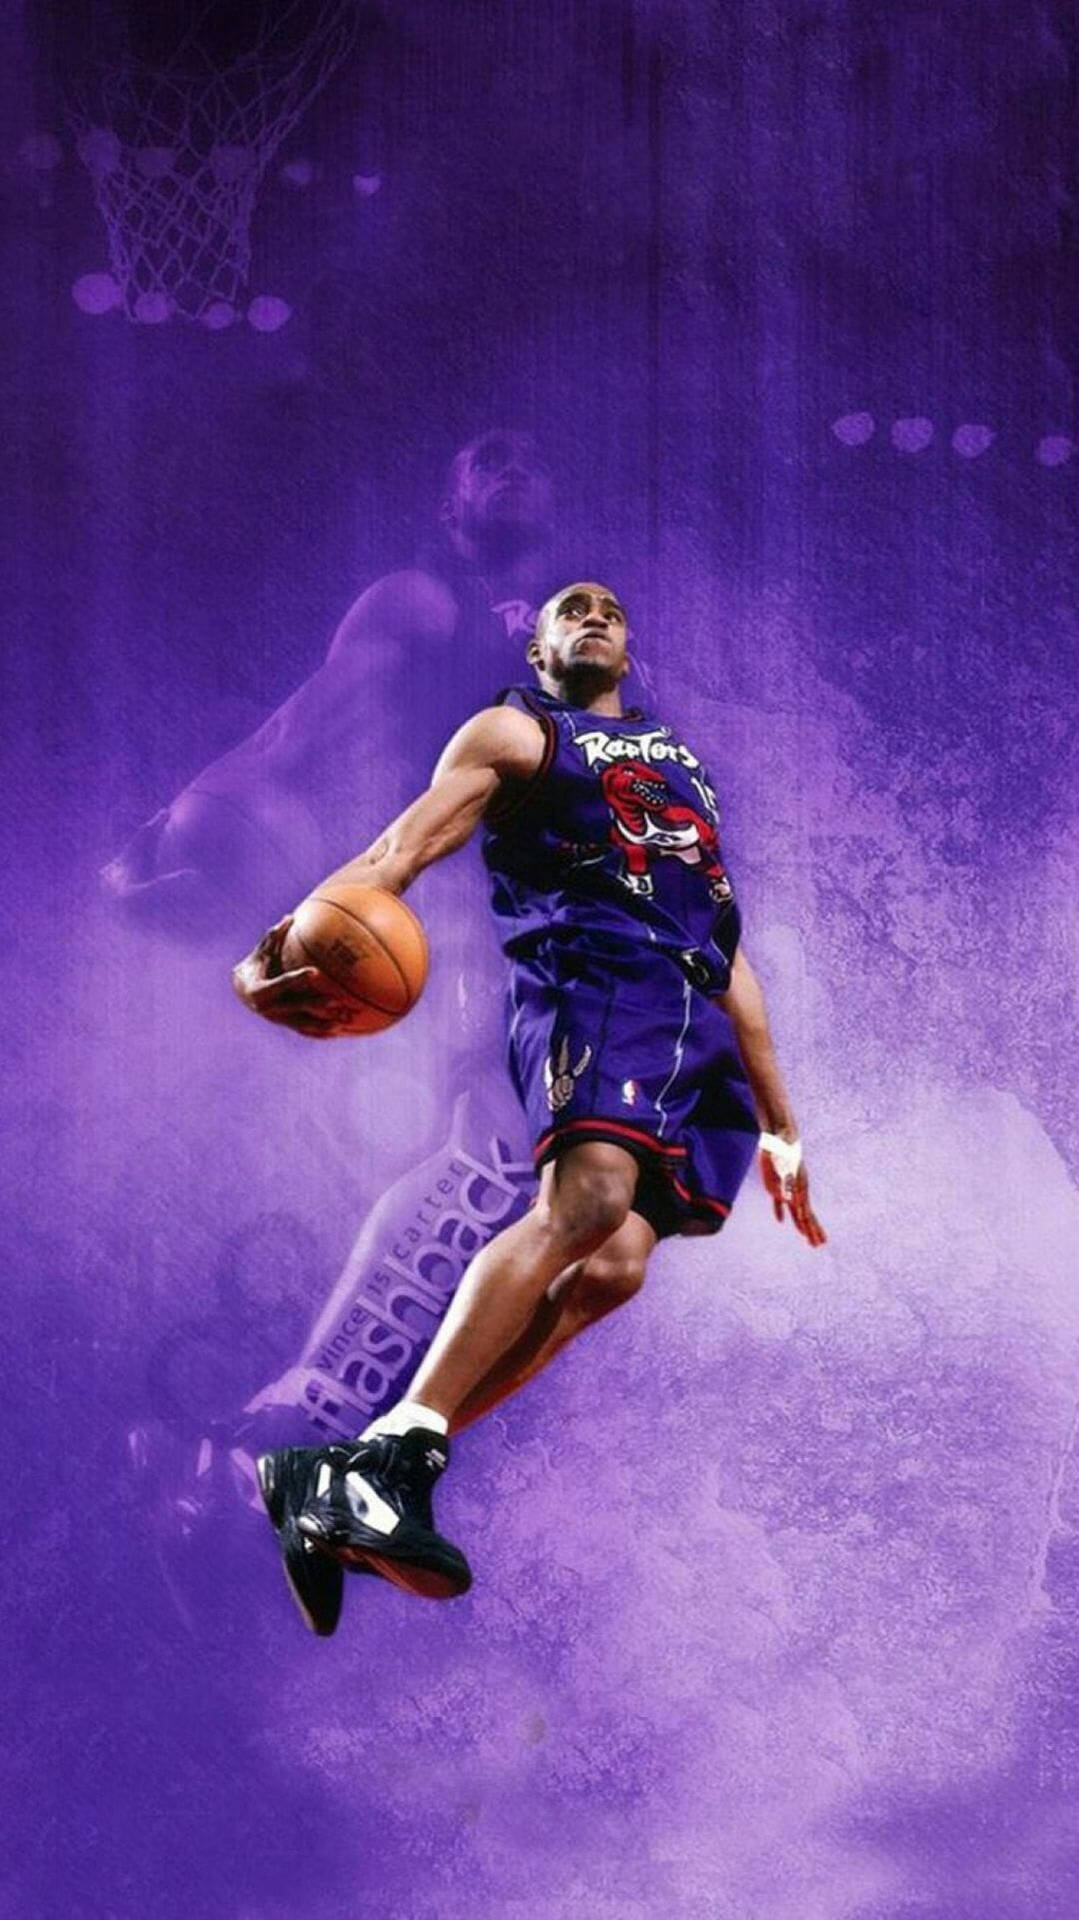 American Professional Basketball Player Vince Carter Sports iPhone Wallpaper